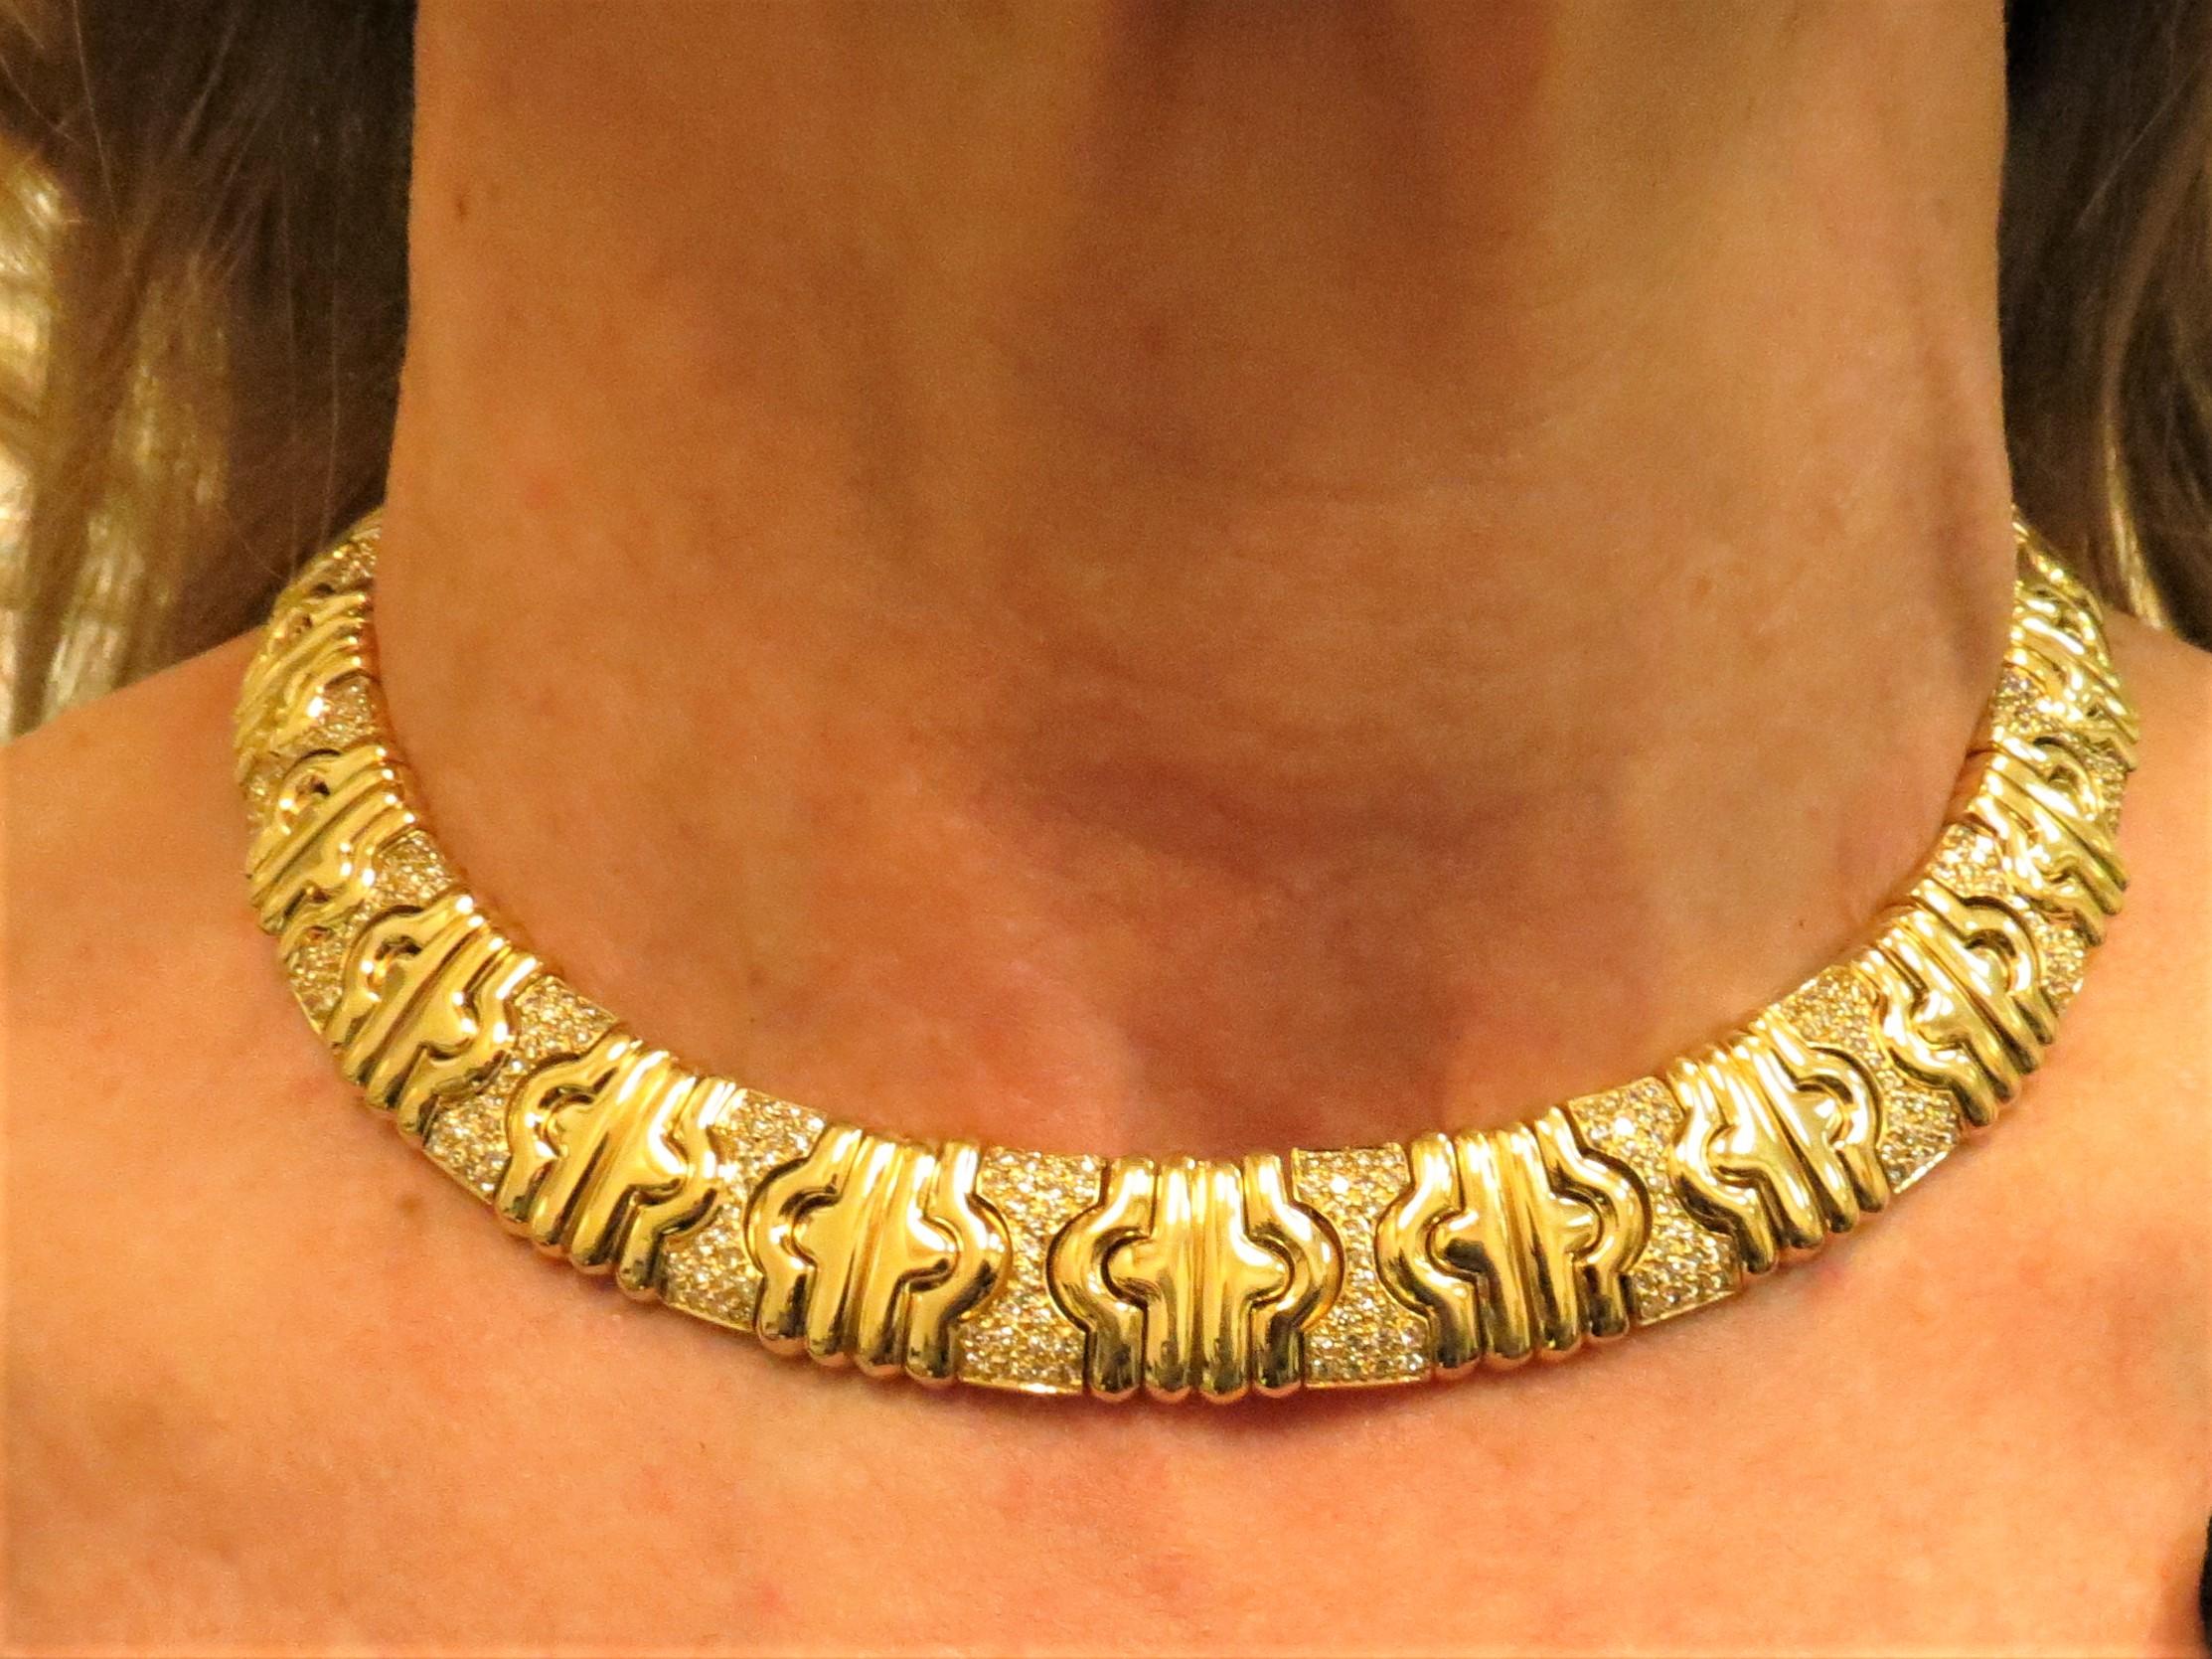 18K yellow gold choker necklace set with 264 full cut round diamonds weighing 4.45cts, GH color, VS clarity. 16 inch length.
Last retail $22500